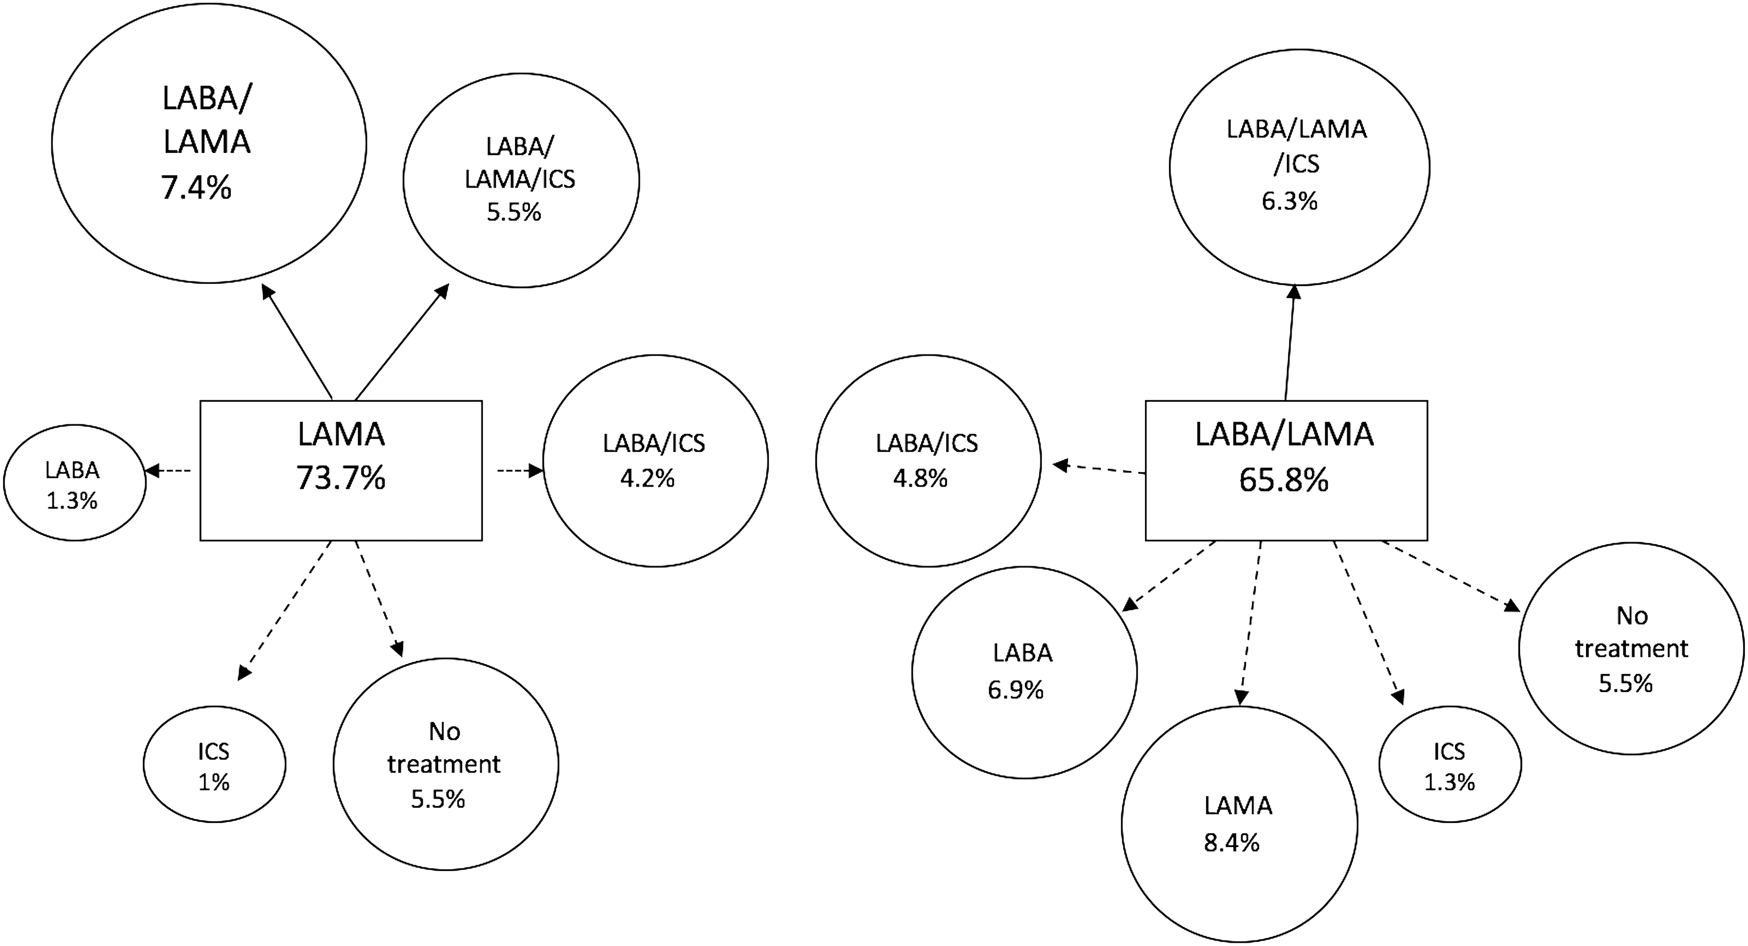 Population-based study of LAMA monotherapy effectiveness compared with LABA/ LAMA as initial treatment for COPD in primary care | npj Primary Care  Respiratory Medicine